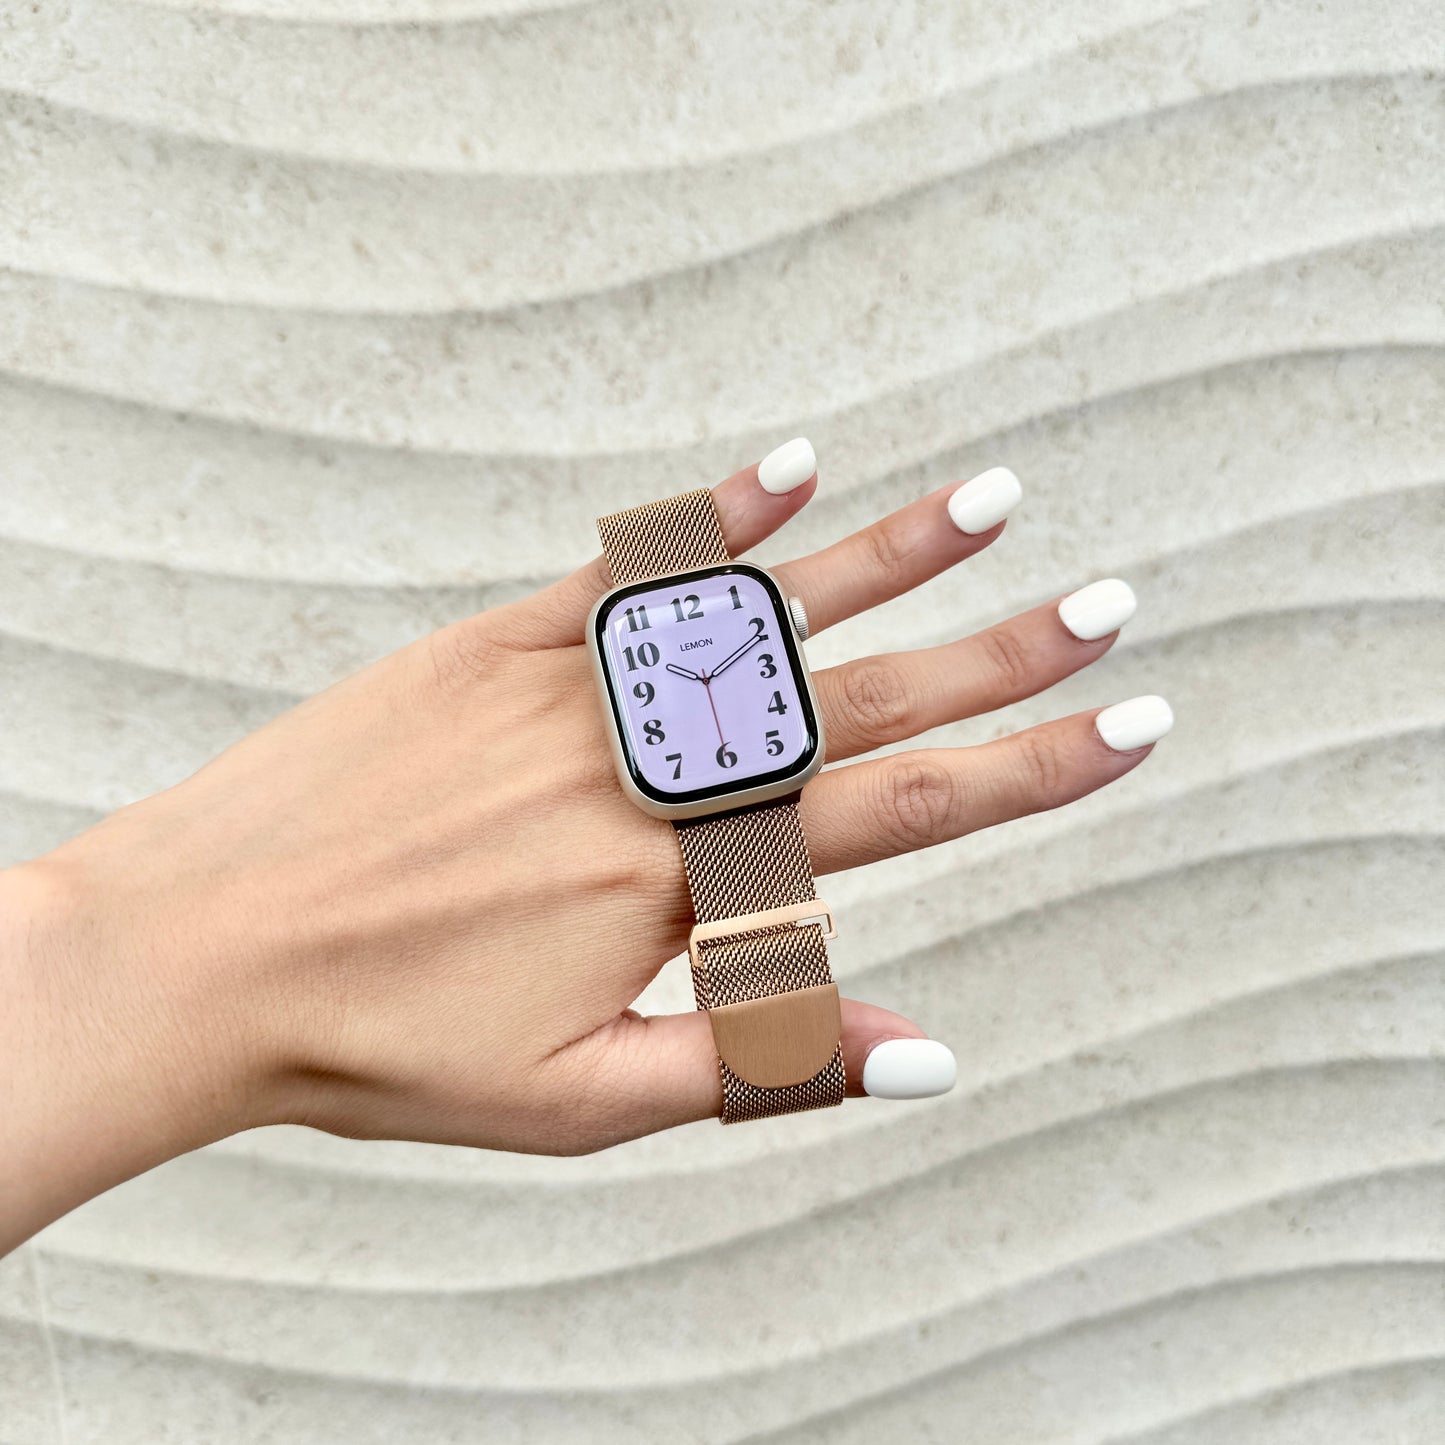 (St-Steel) Milanese Apple Watch Loop with Rounded Clasp - Rose Gold